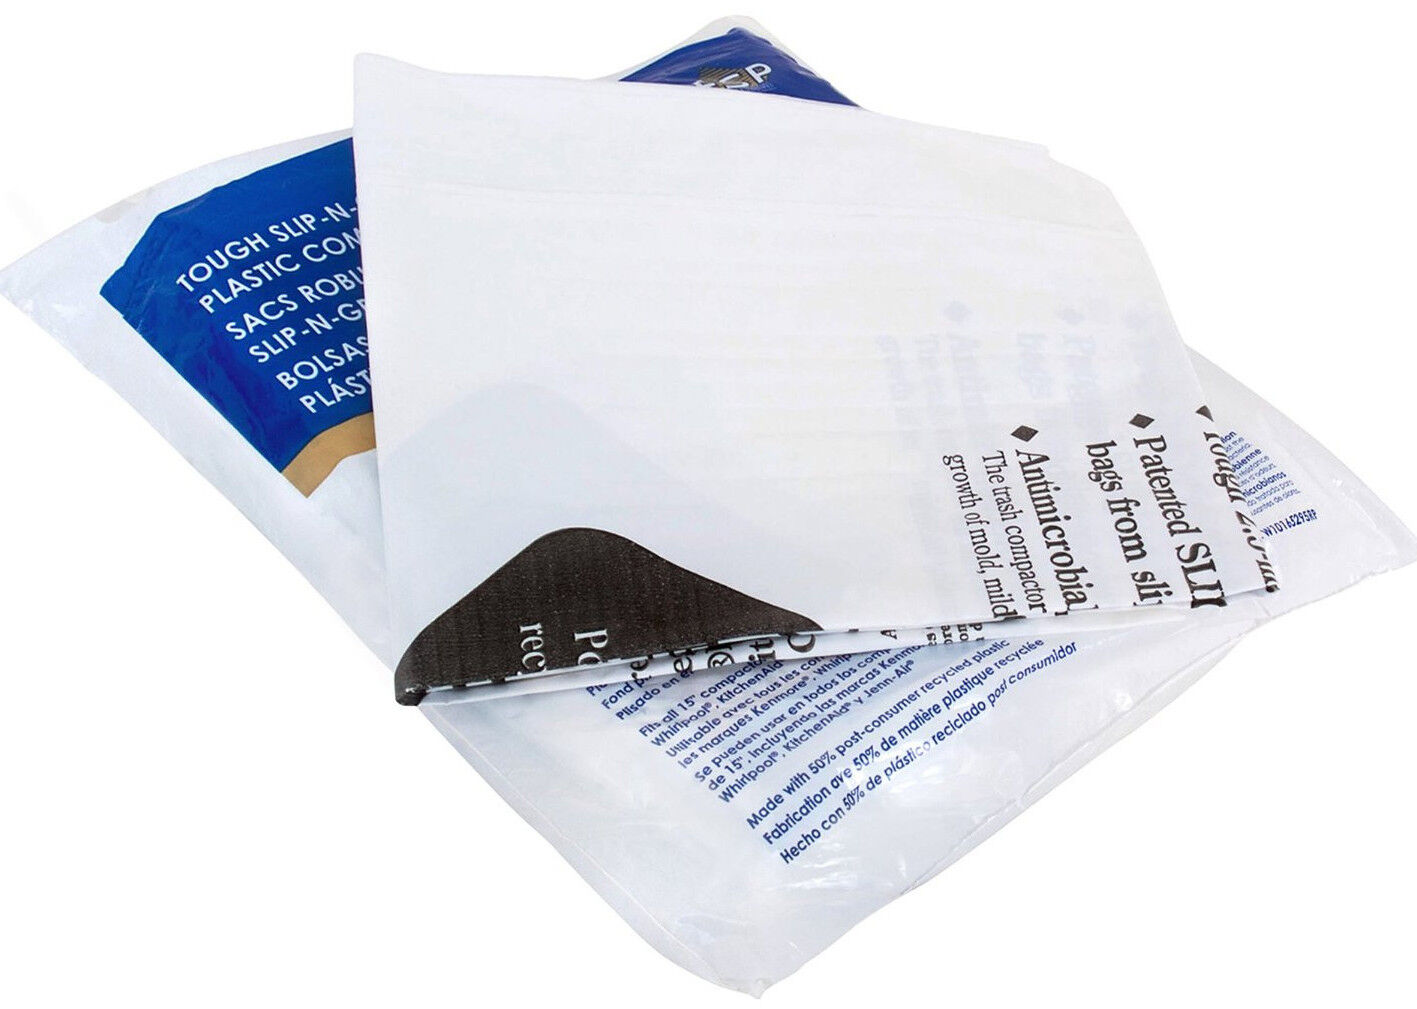 New 60 Pack Whirlpool 15 Inch Plastic Trash Compactor Bags W10165295rp 4318921